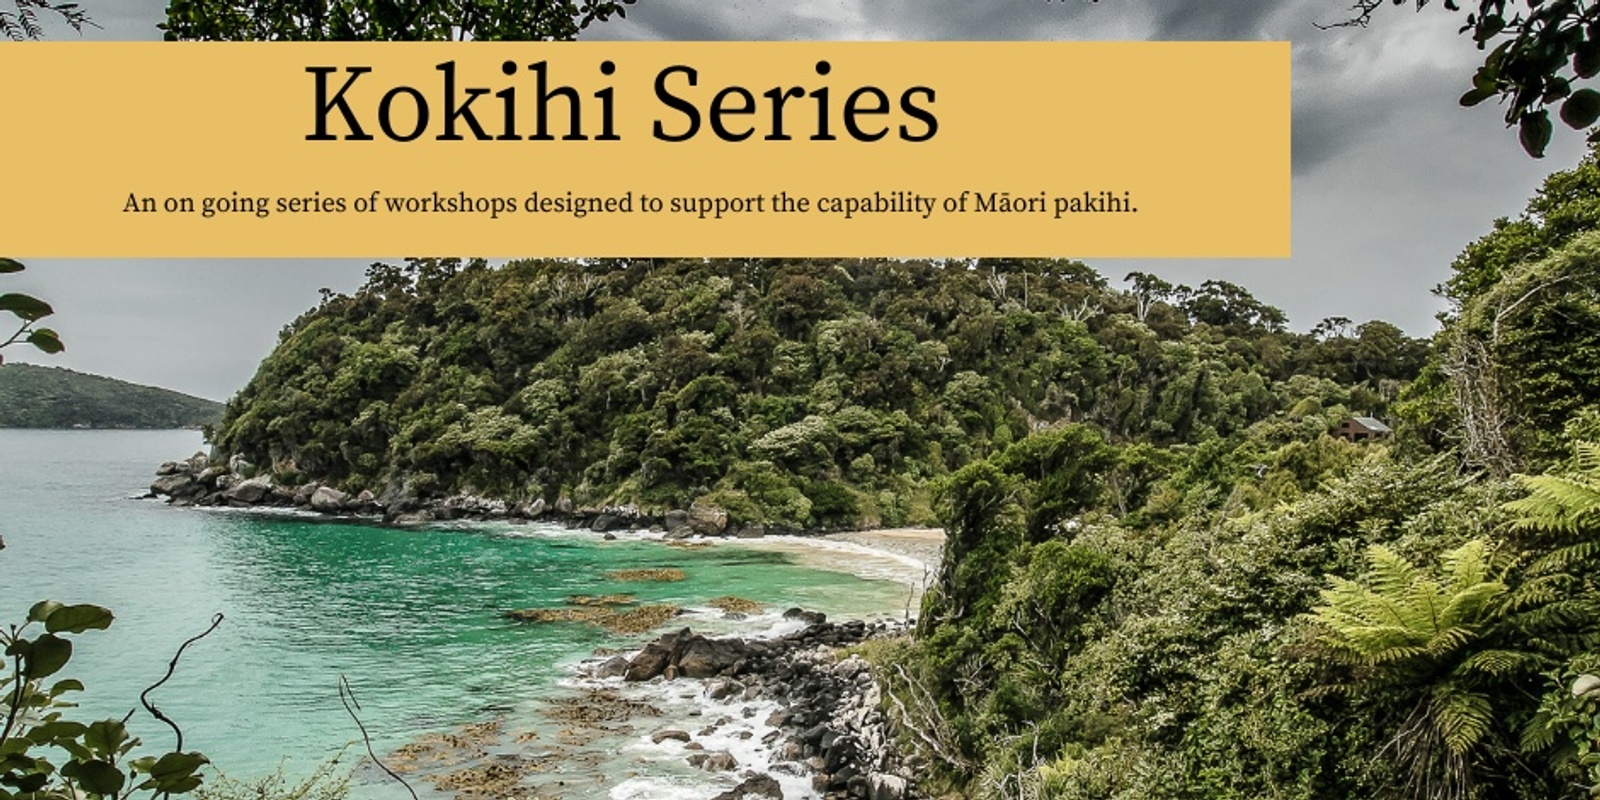 Banner image for Kōkihi Series - Intellectual property laws 